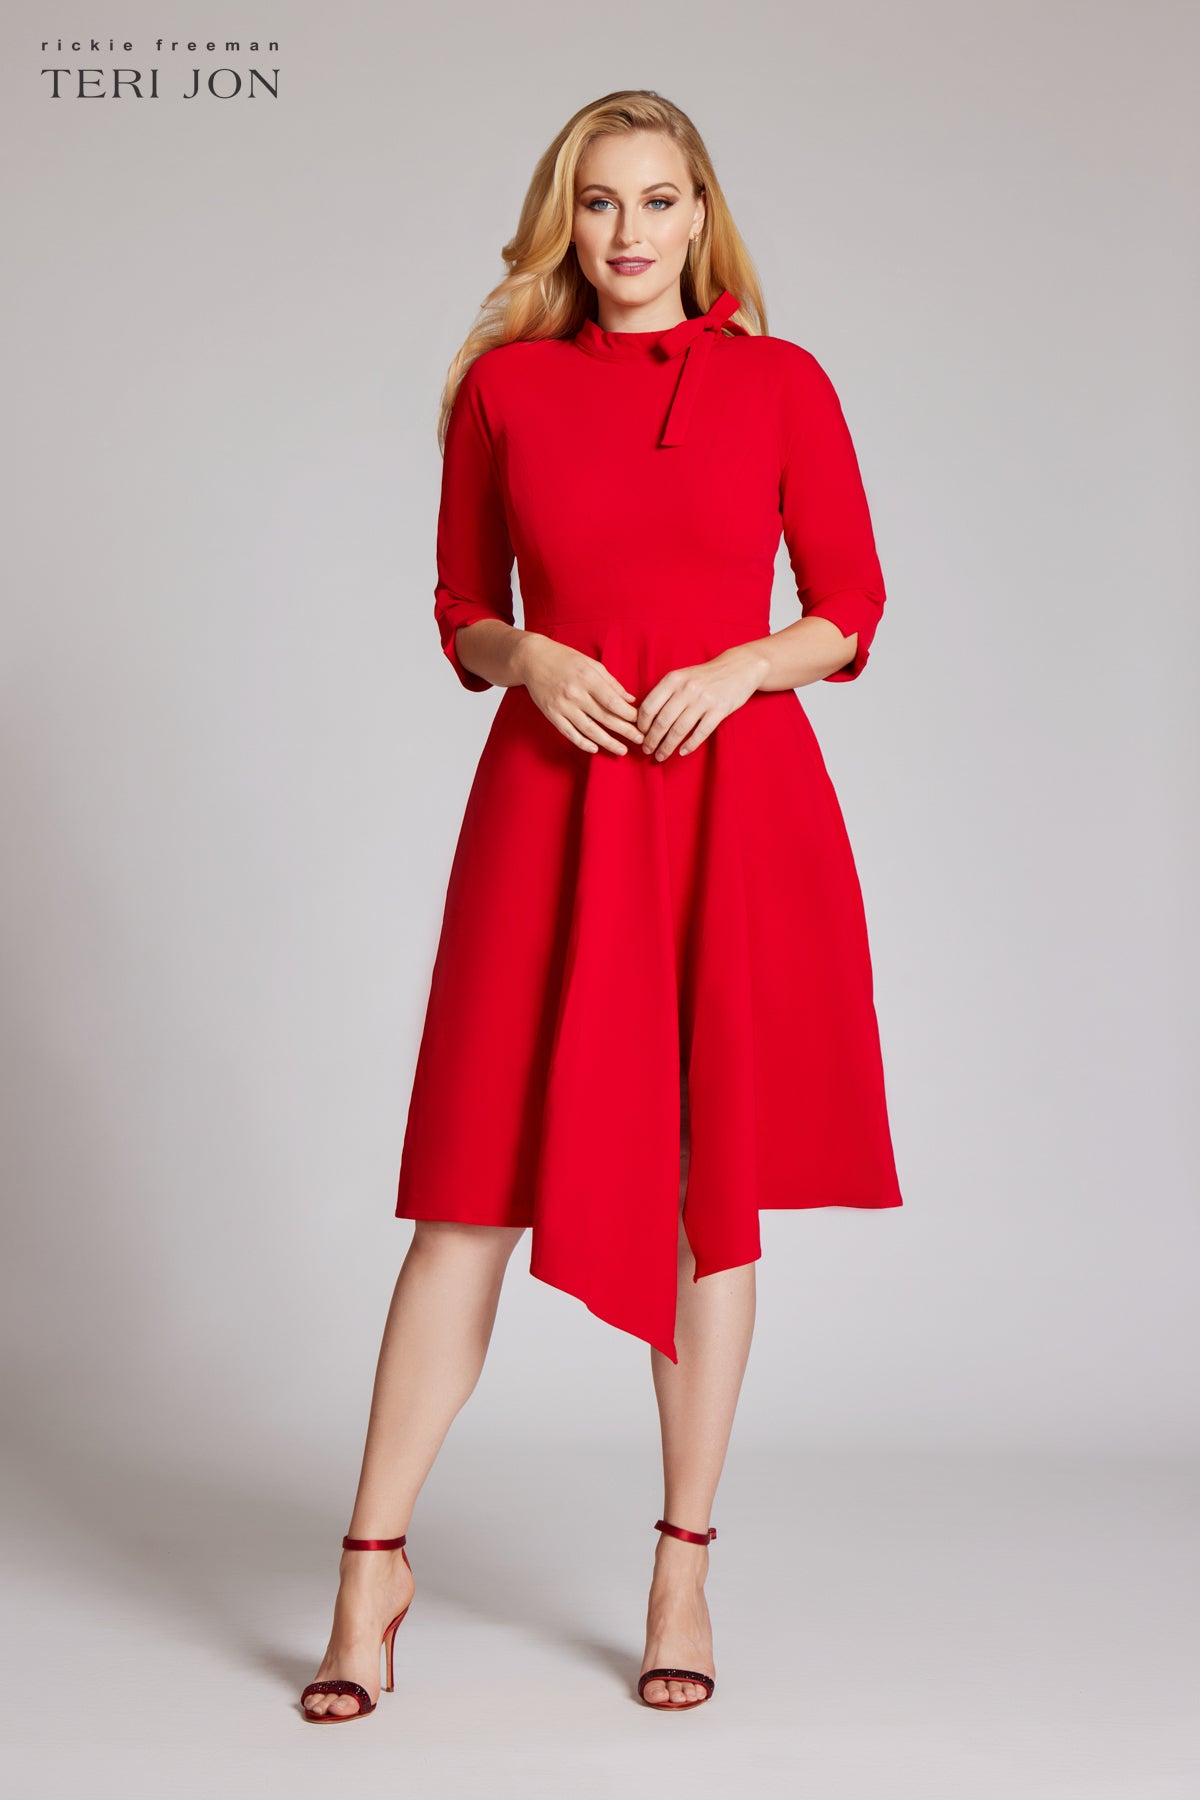 color red plus size image